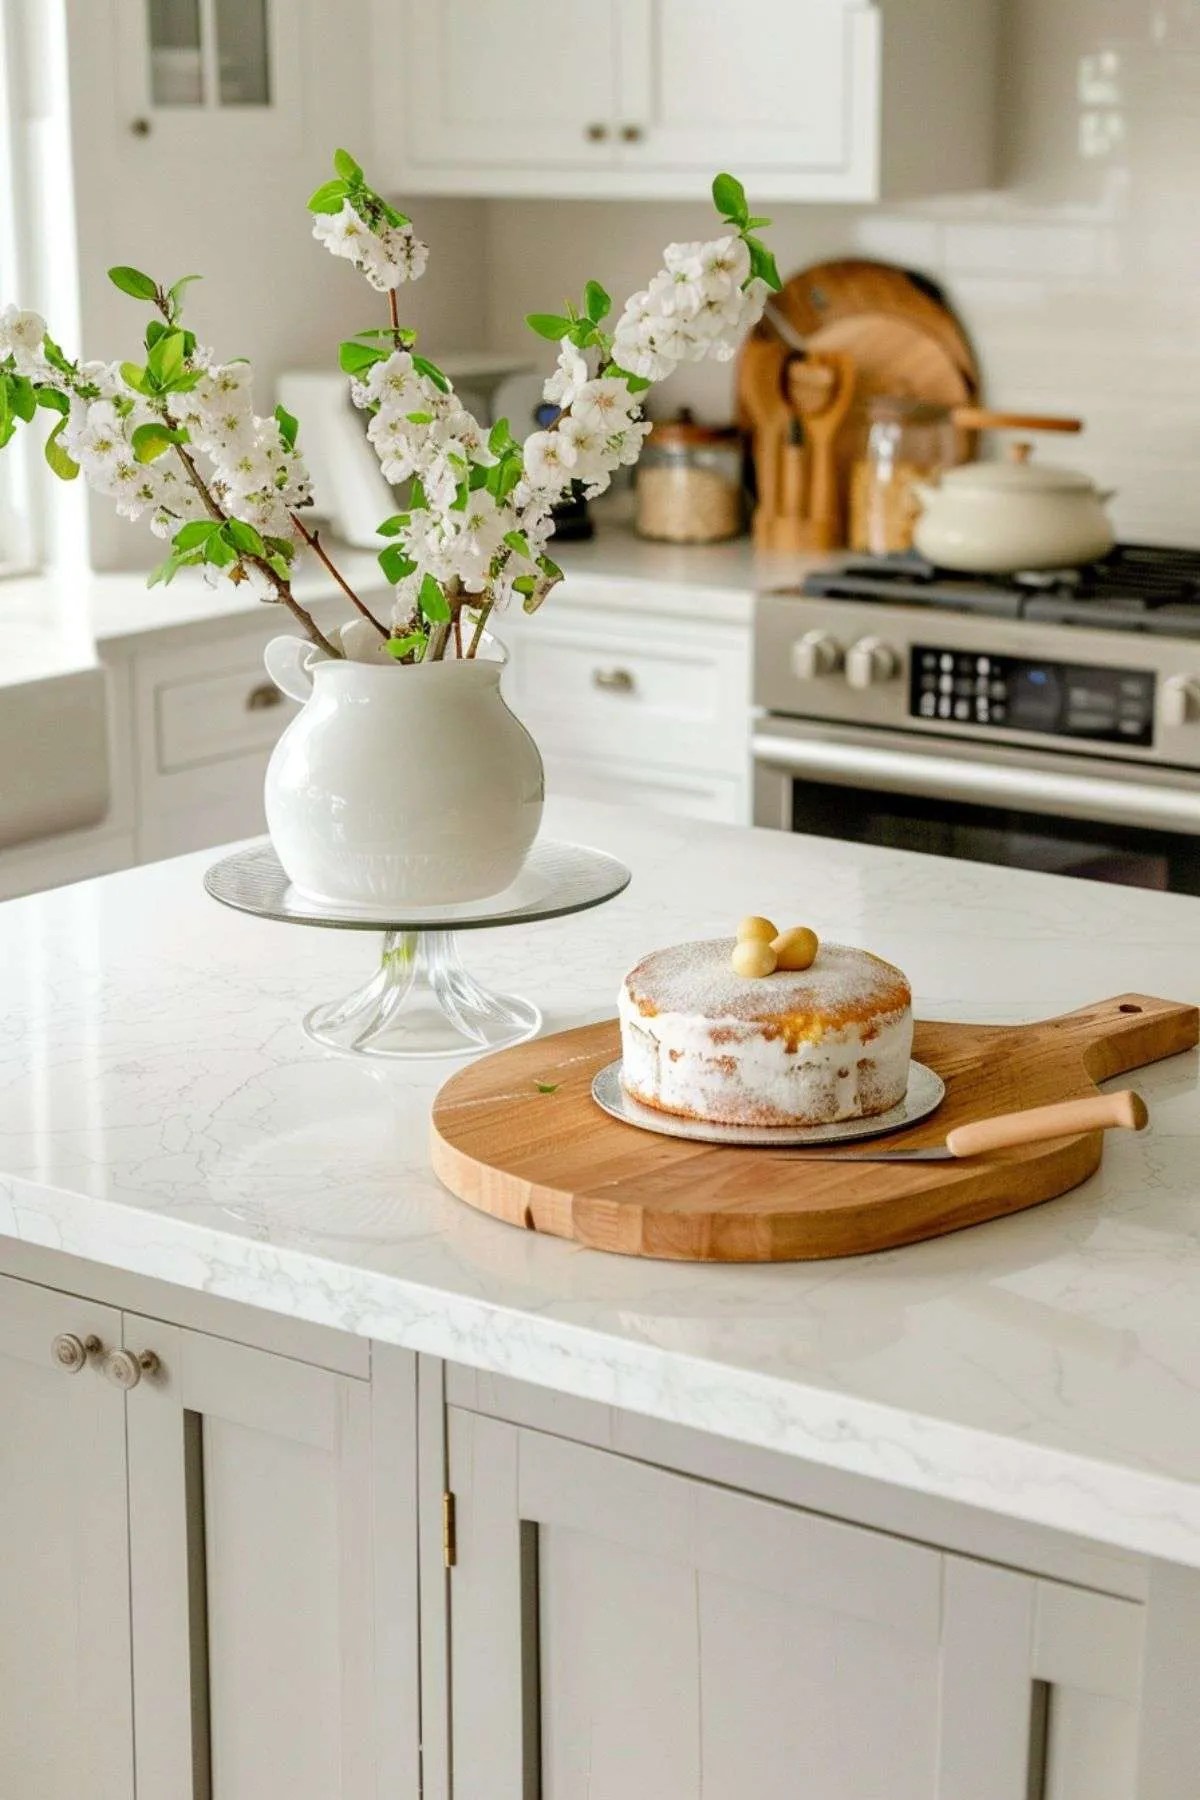 How to Decorate a Kitchen Island Like a Pro With These 10 Easy Ideas!